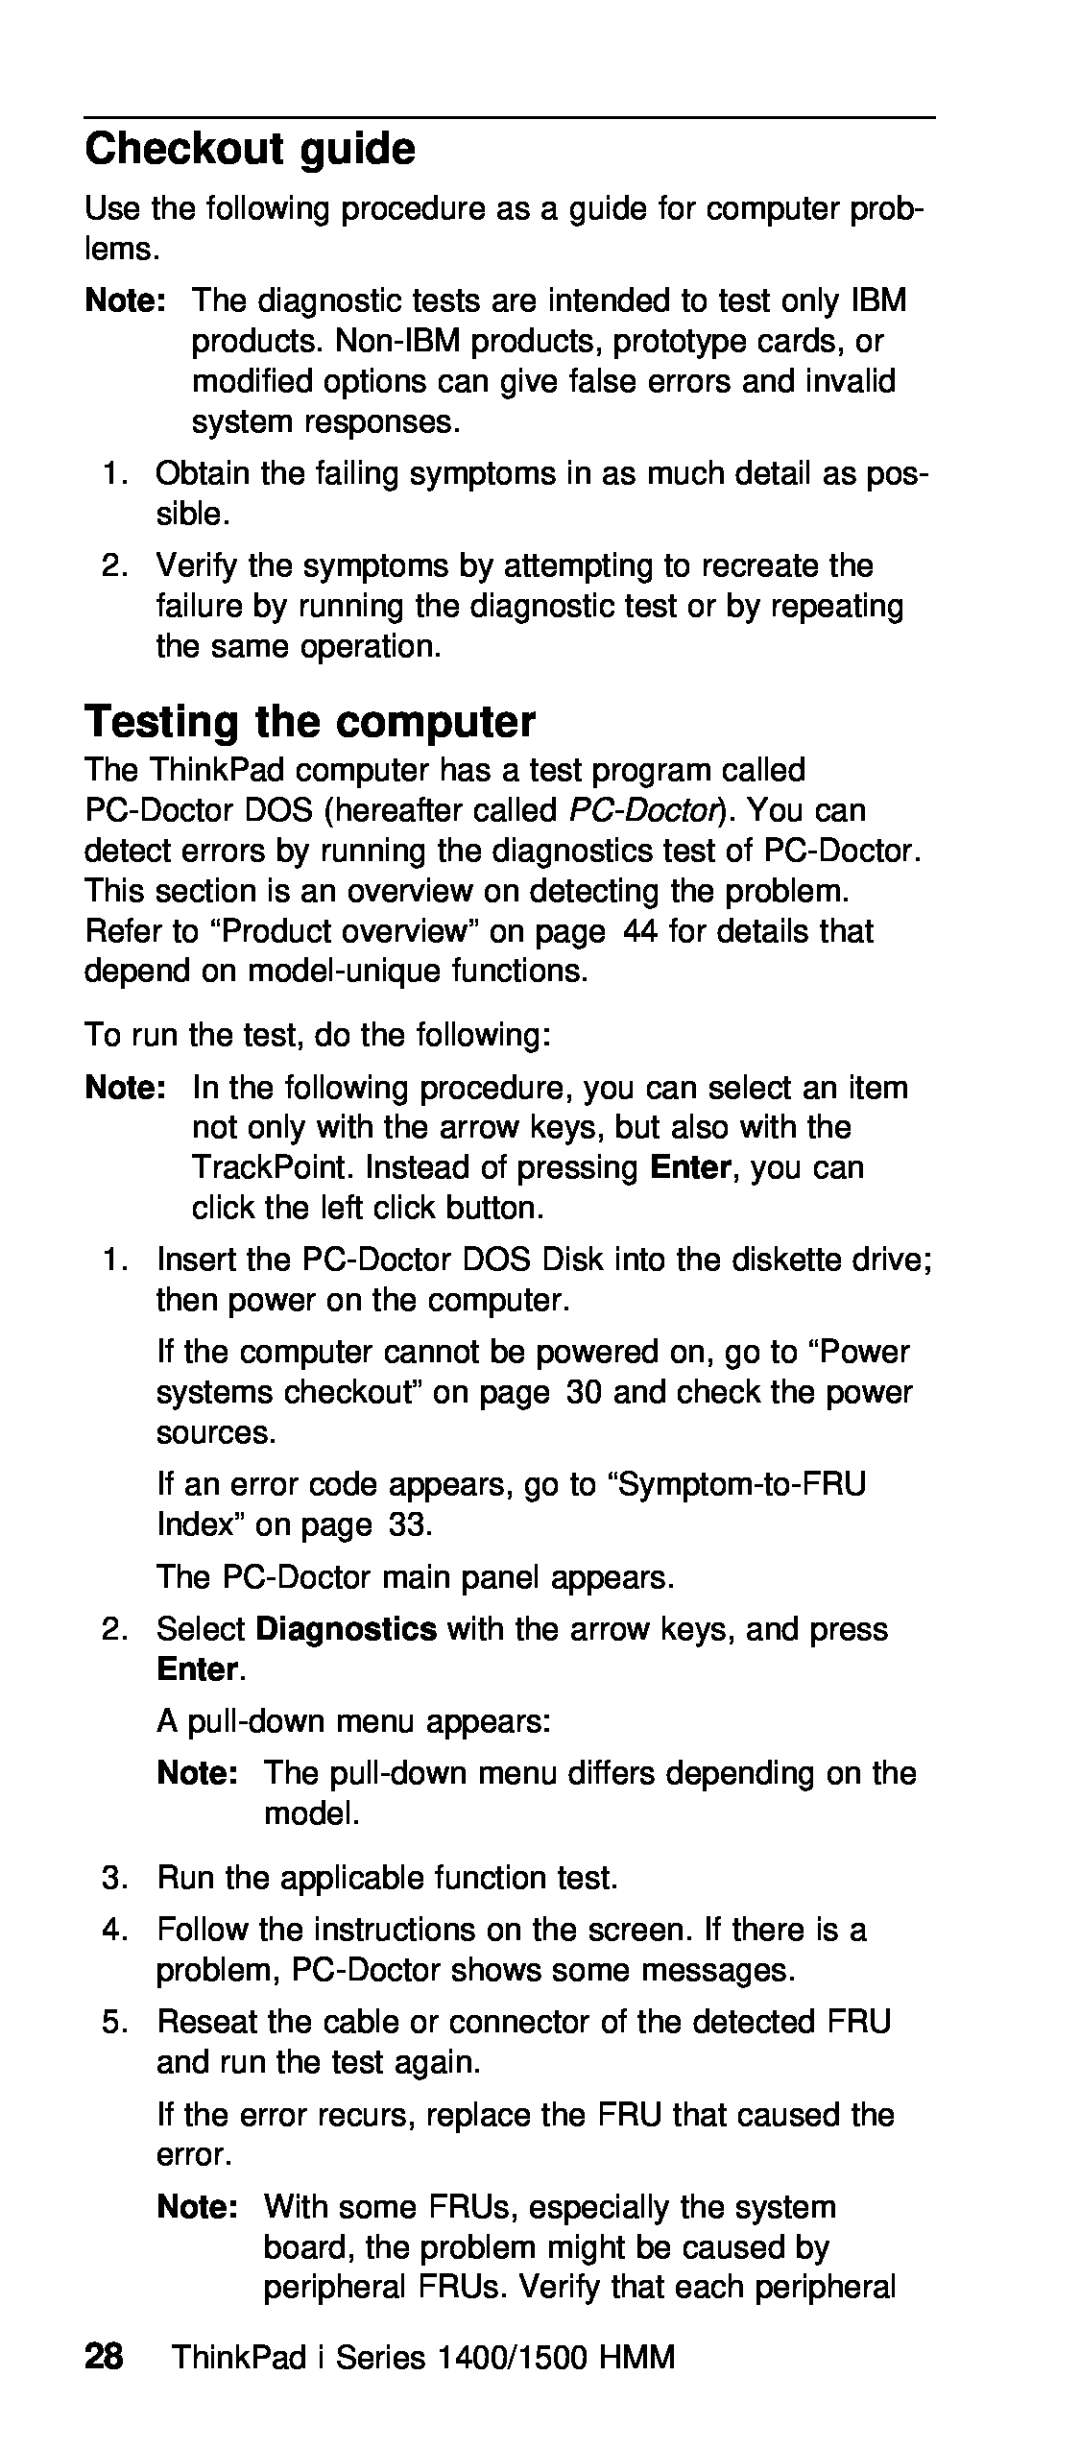 IBM Series 1500, Series 1400 manual Checkout guide, Testing the computer 